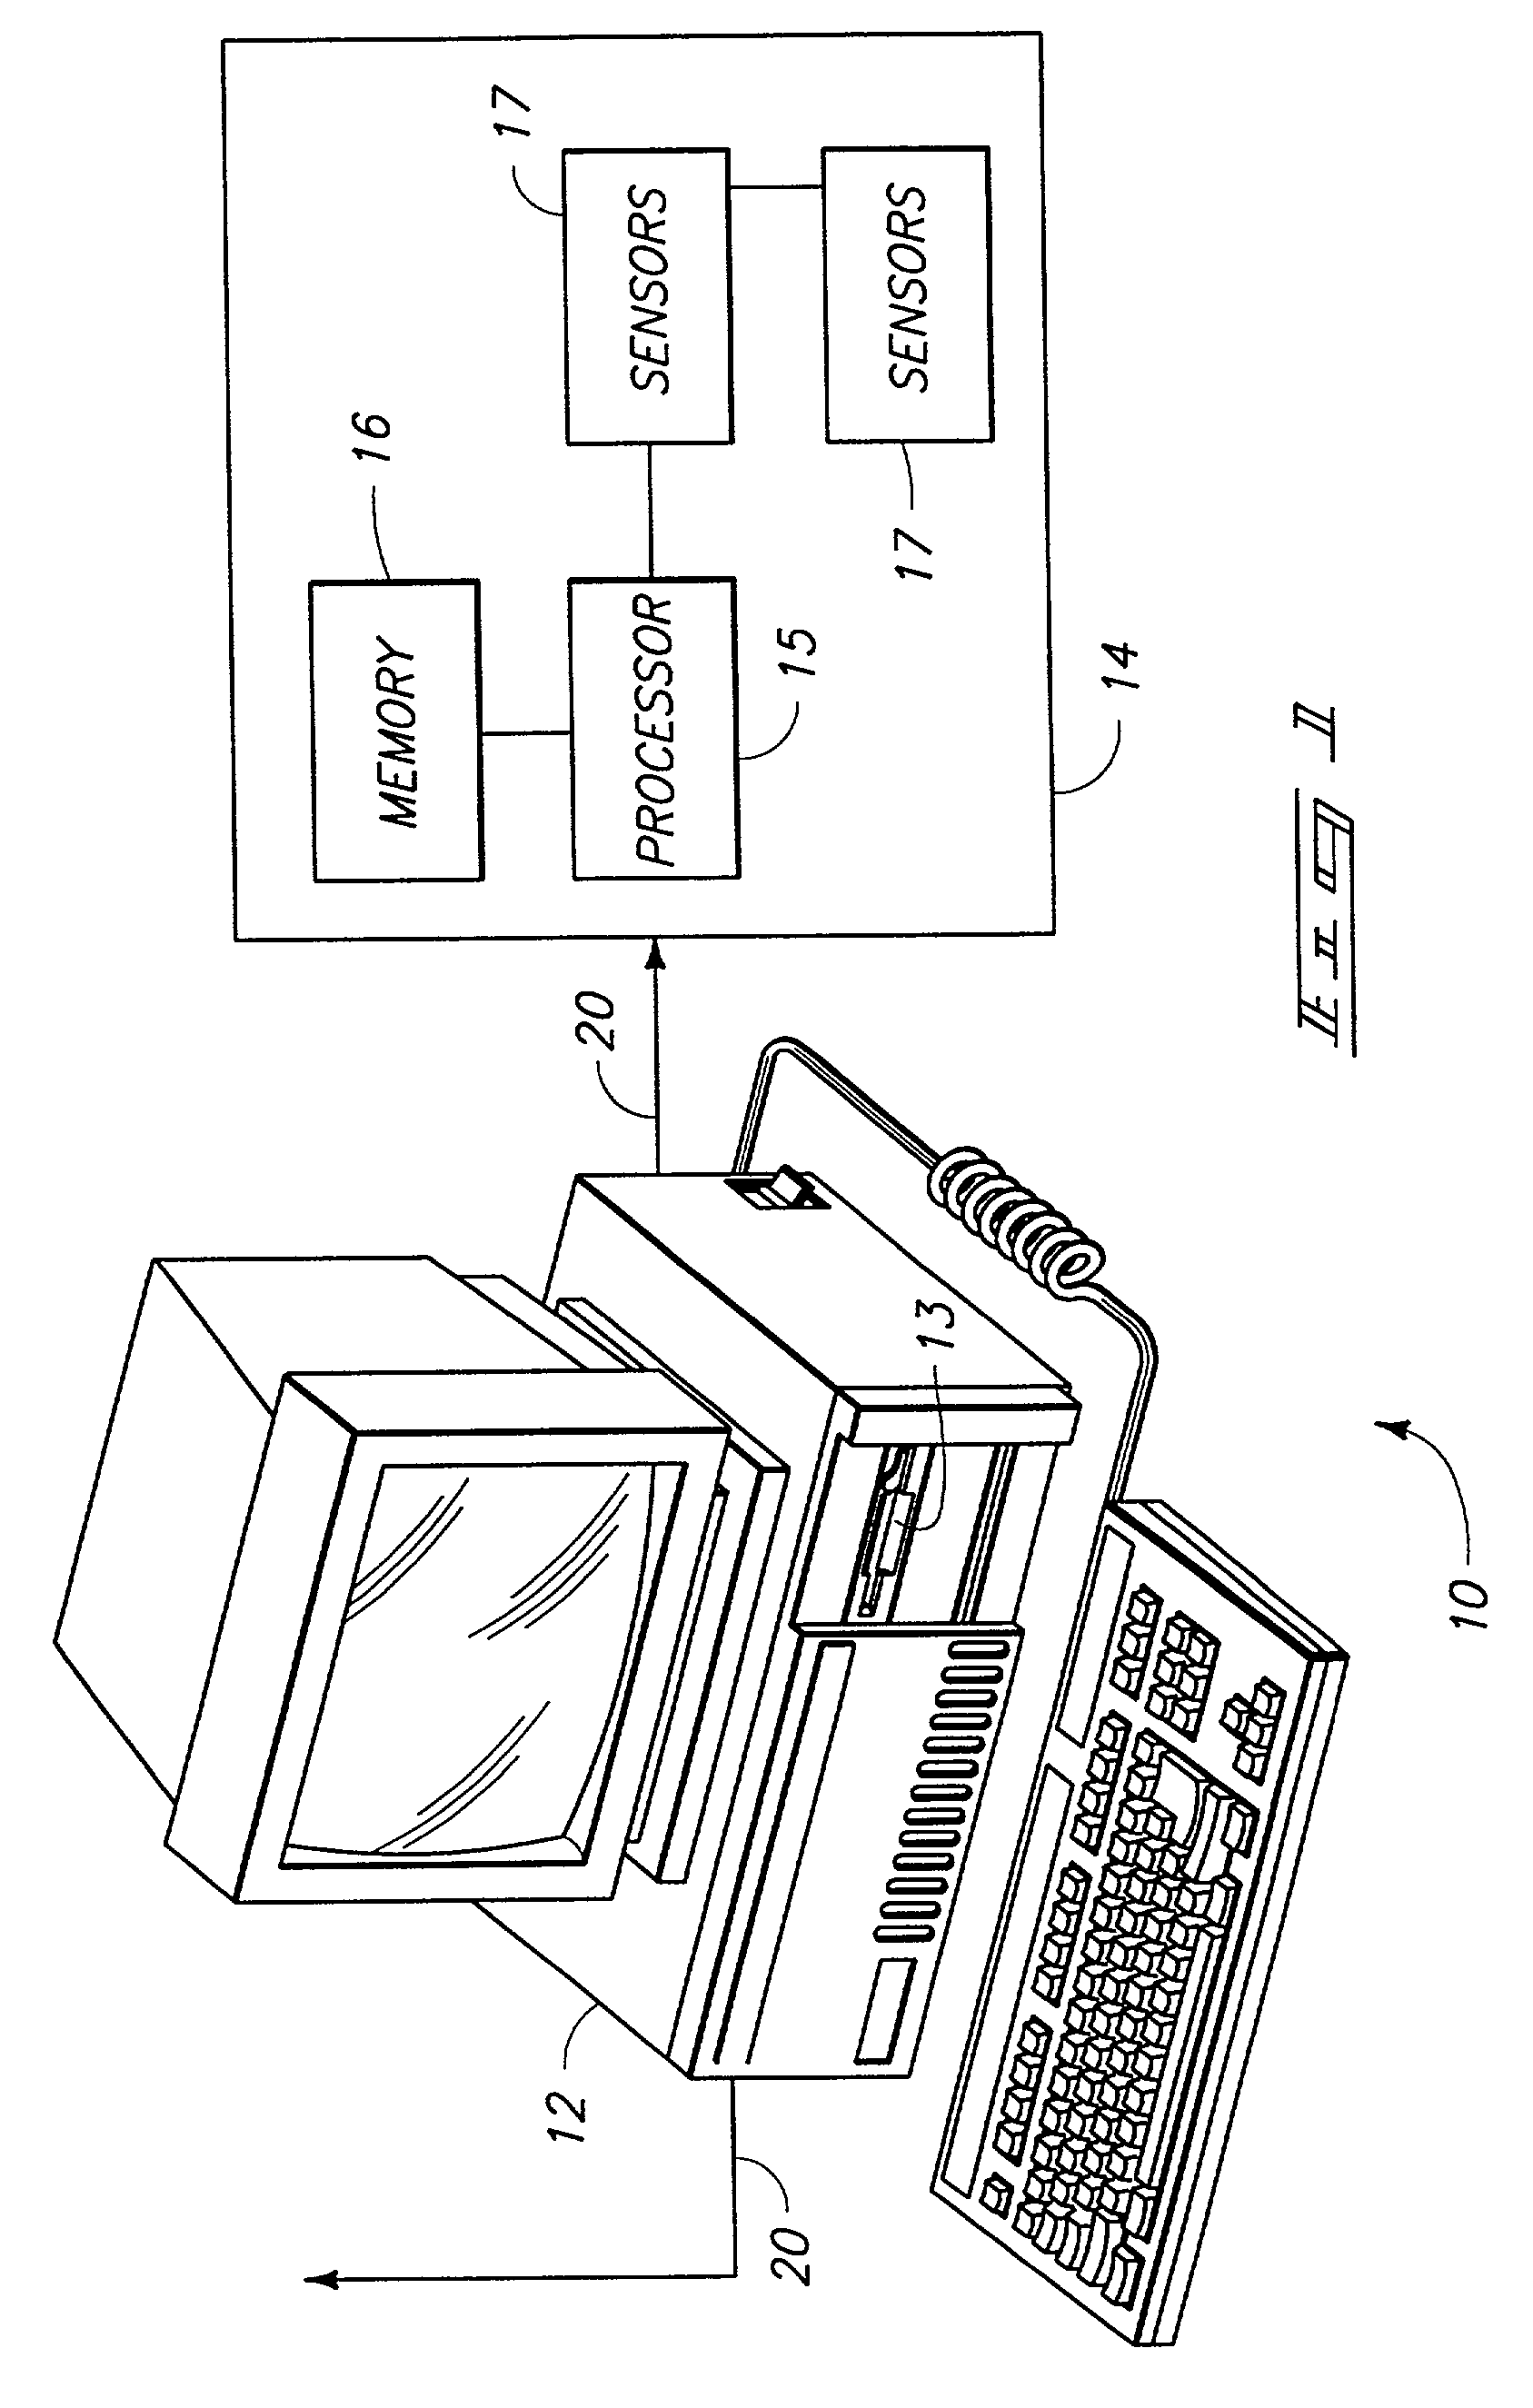 Reorder assistance notification of near end-of-life consumables and method